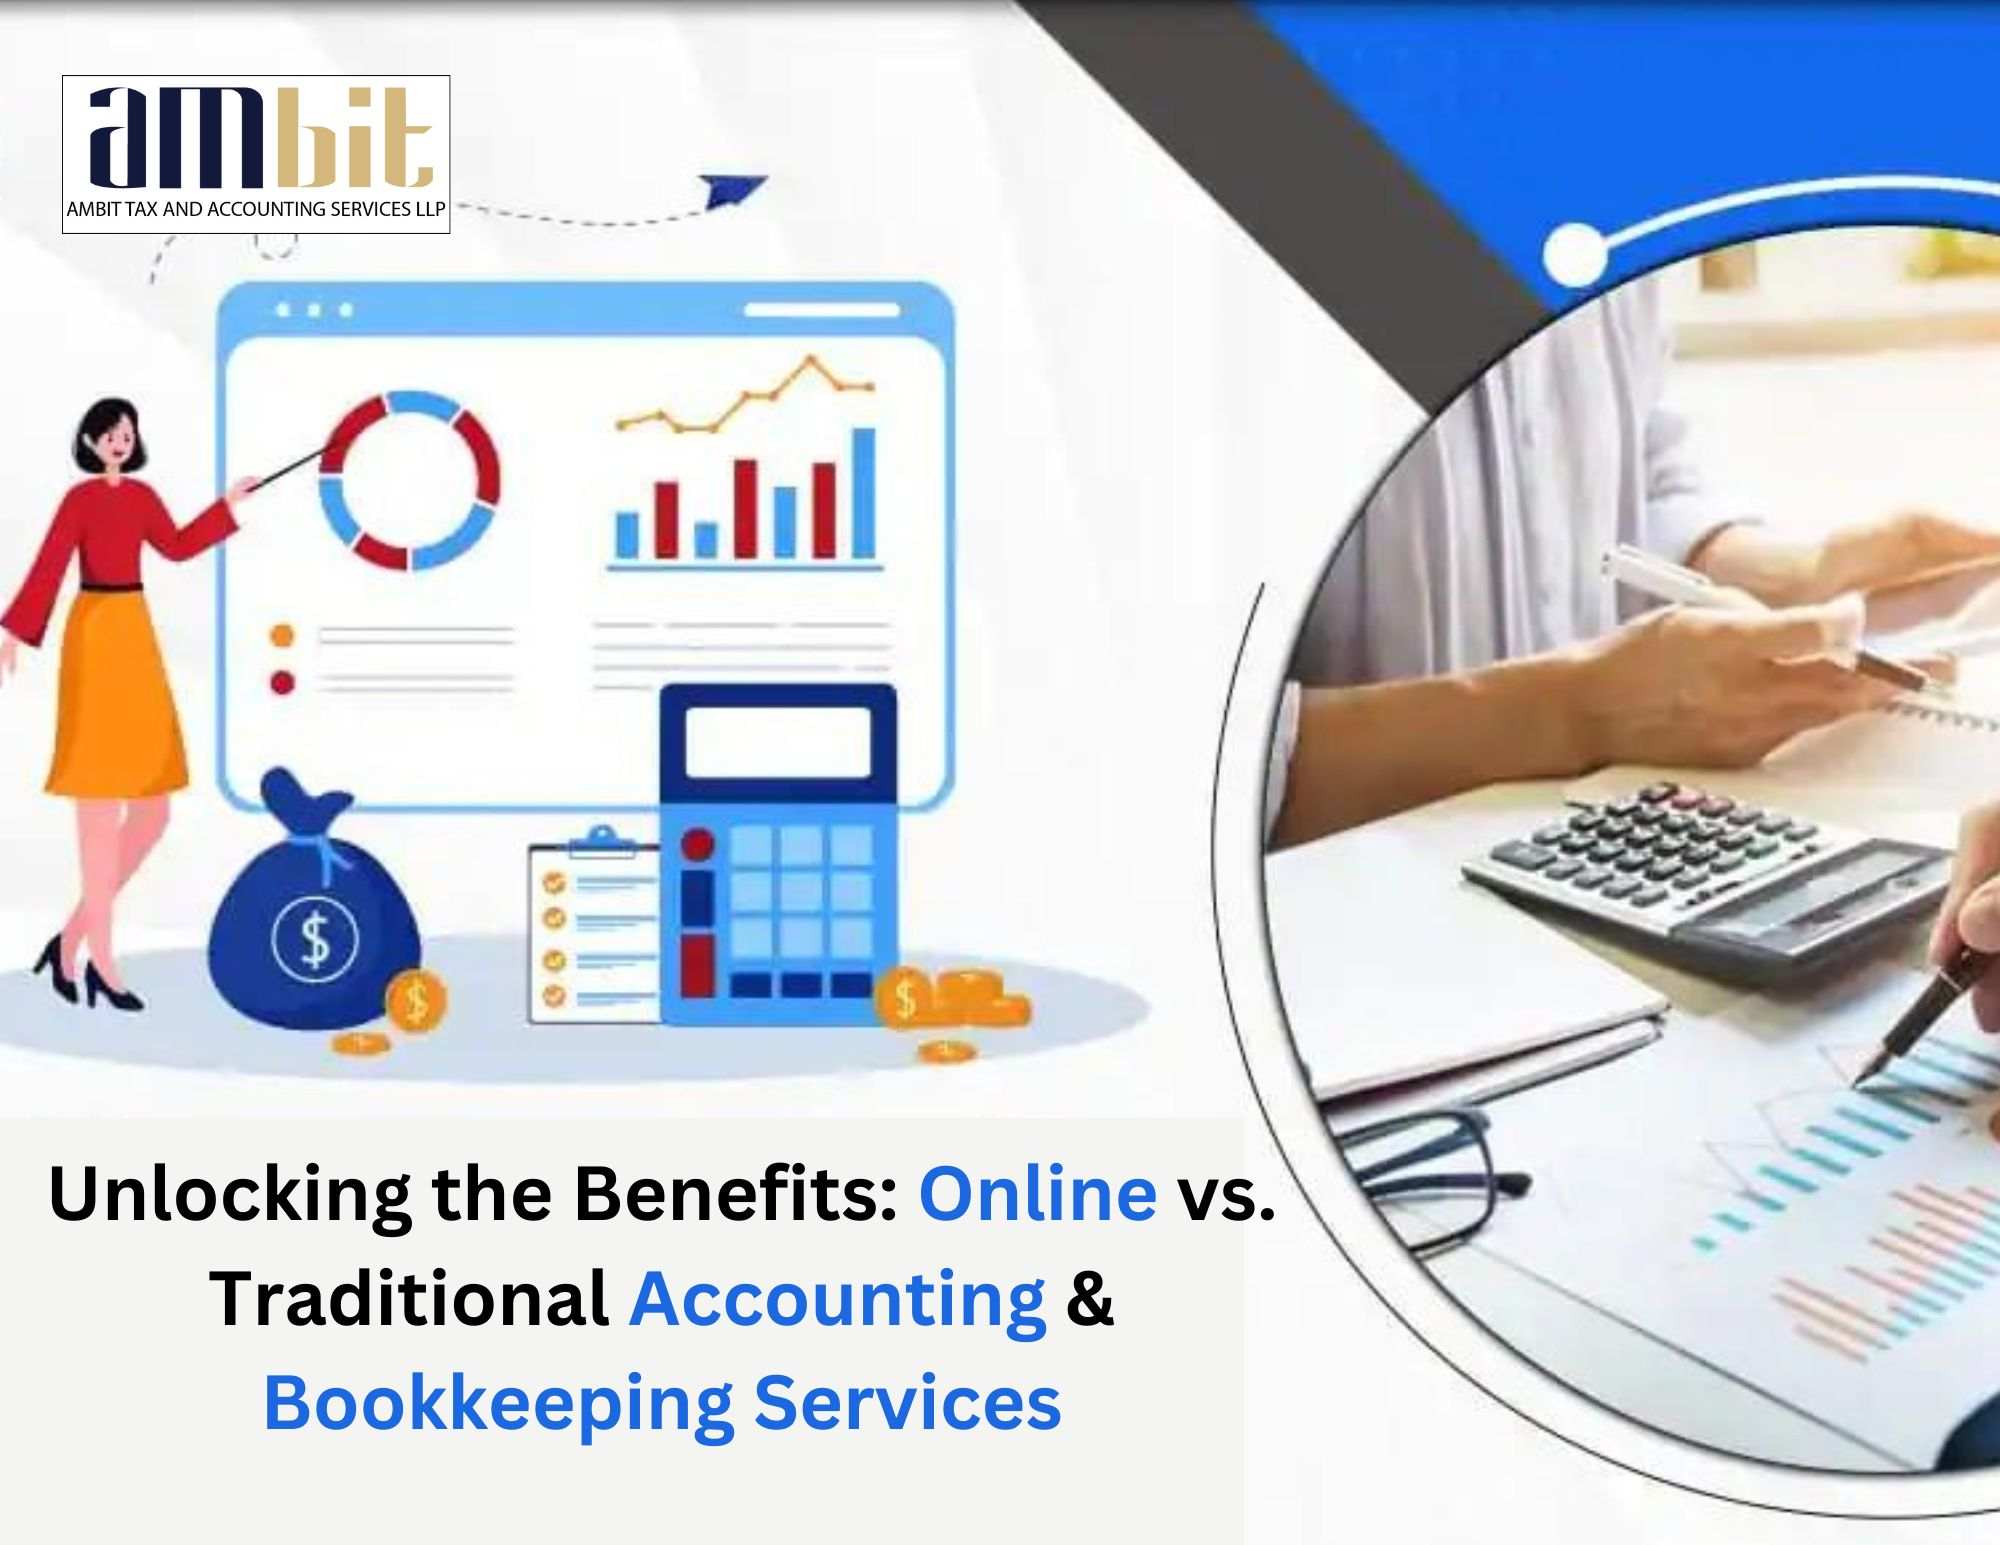  Unlocking the Benefits: Online vs. Traditional Accounting & Bookkeeping Services